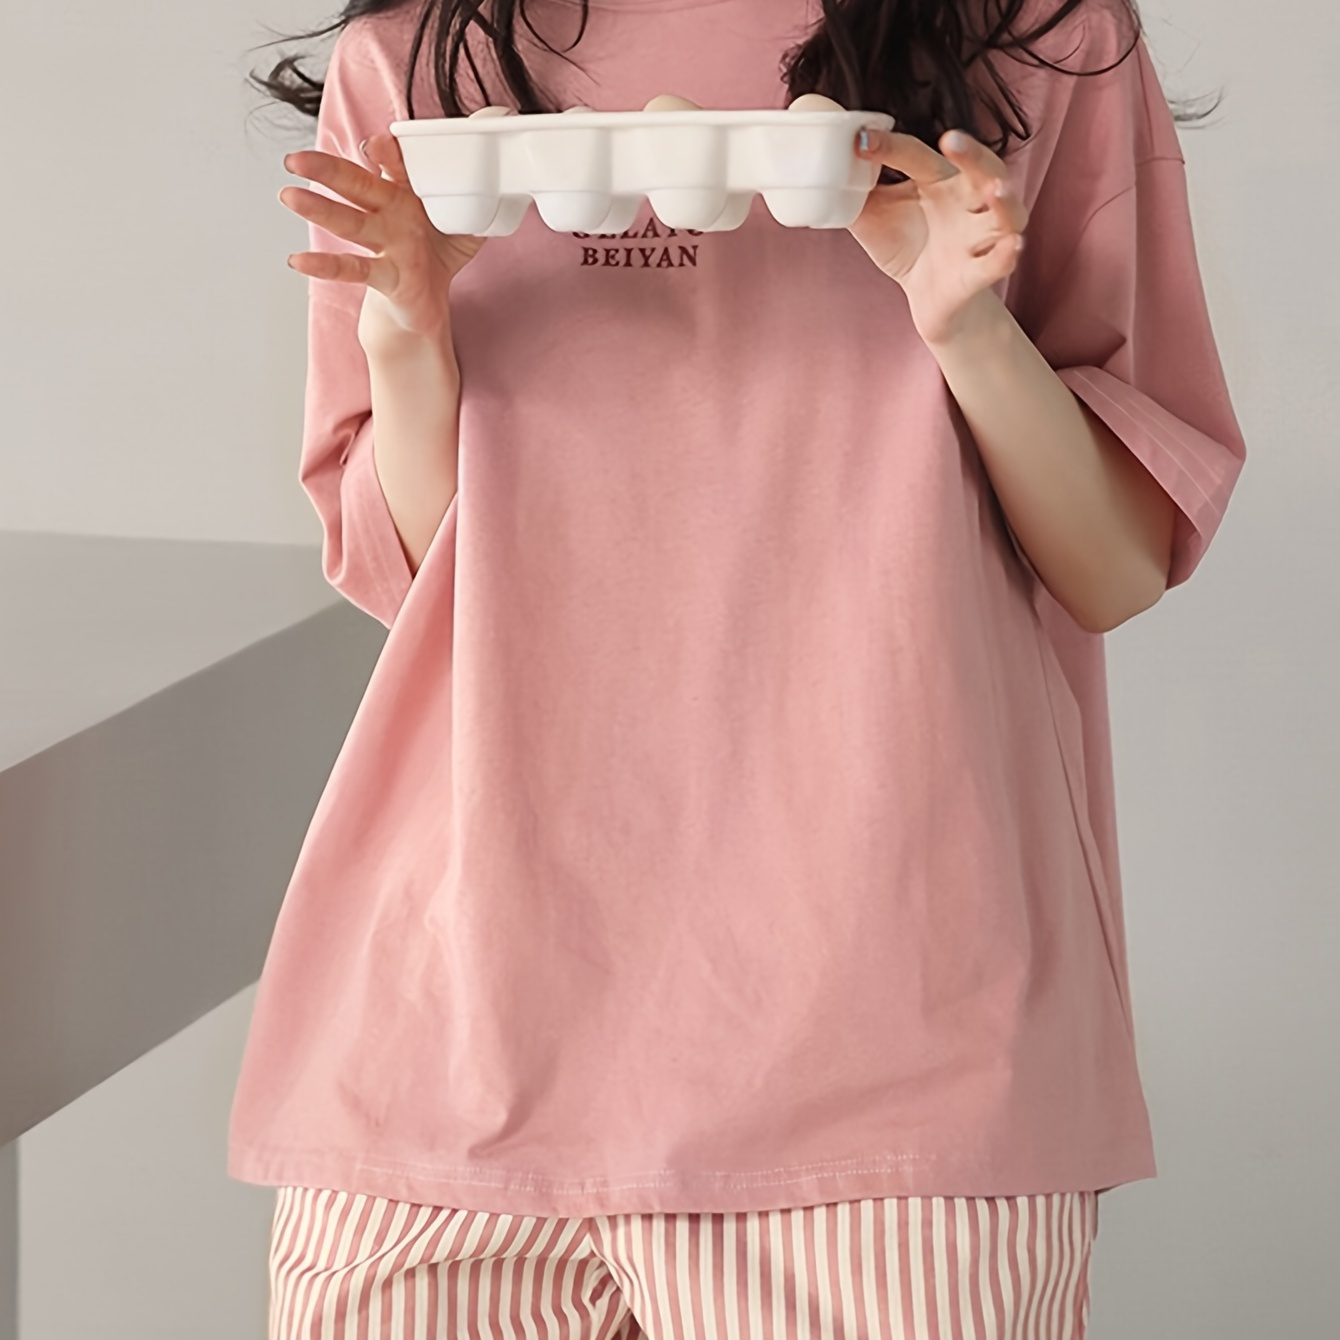 

Women's Stripe & Letter Print Casual Pajama Set, Drop Shoulder Short Sleeve Round Neck Top & Shorts, Comfortable Relaxed Fit